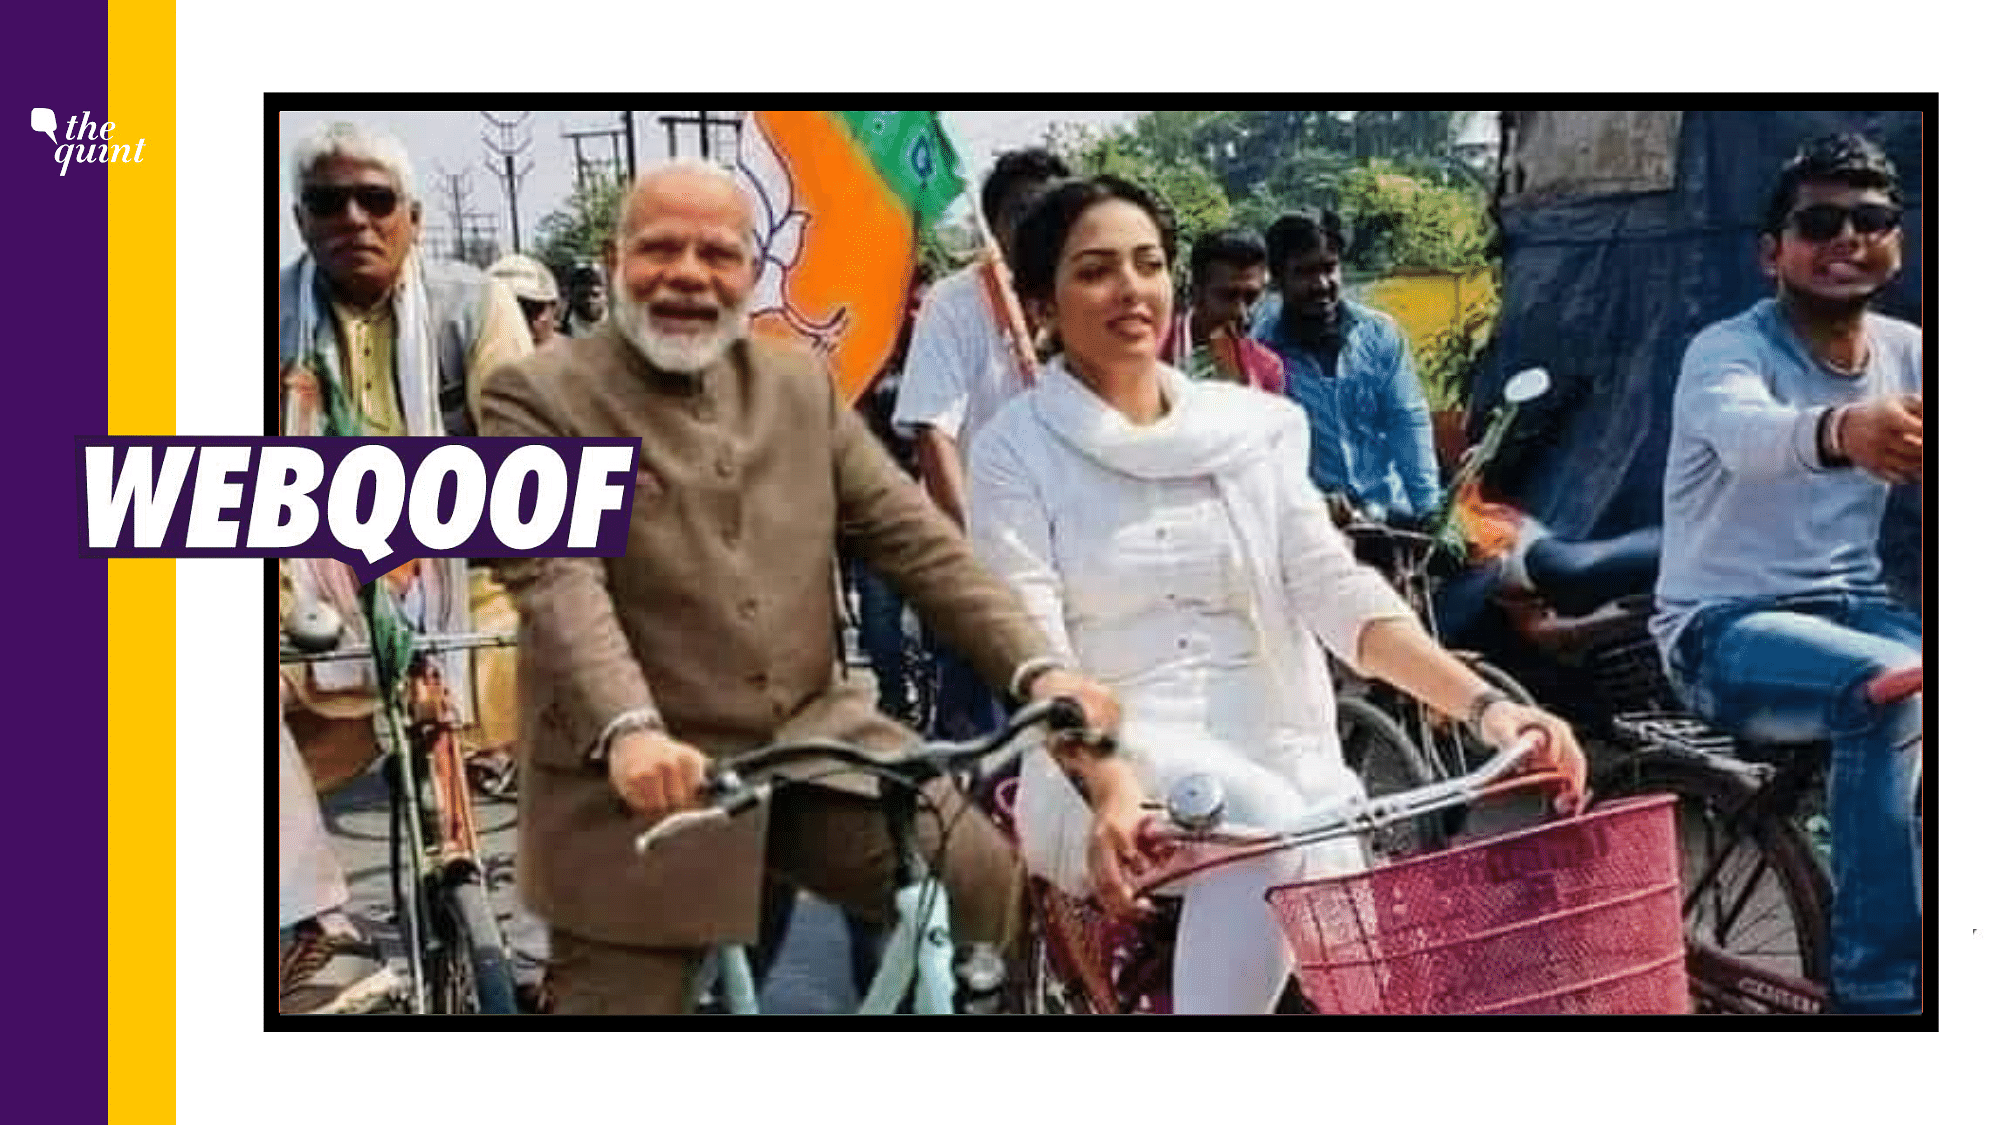 A morphed image of Prime Minister Narendra Modi cycling with West Bengal’s Bharatiya Janata Yuva Morcha leader, Pamela Goswami, in a rally has gone viral on social media.